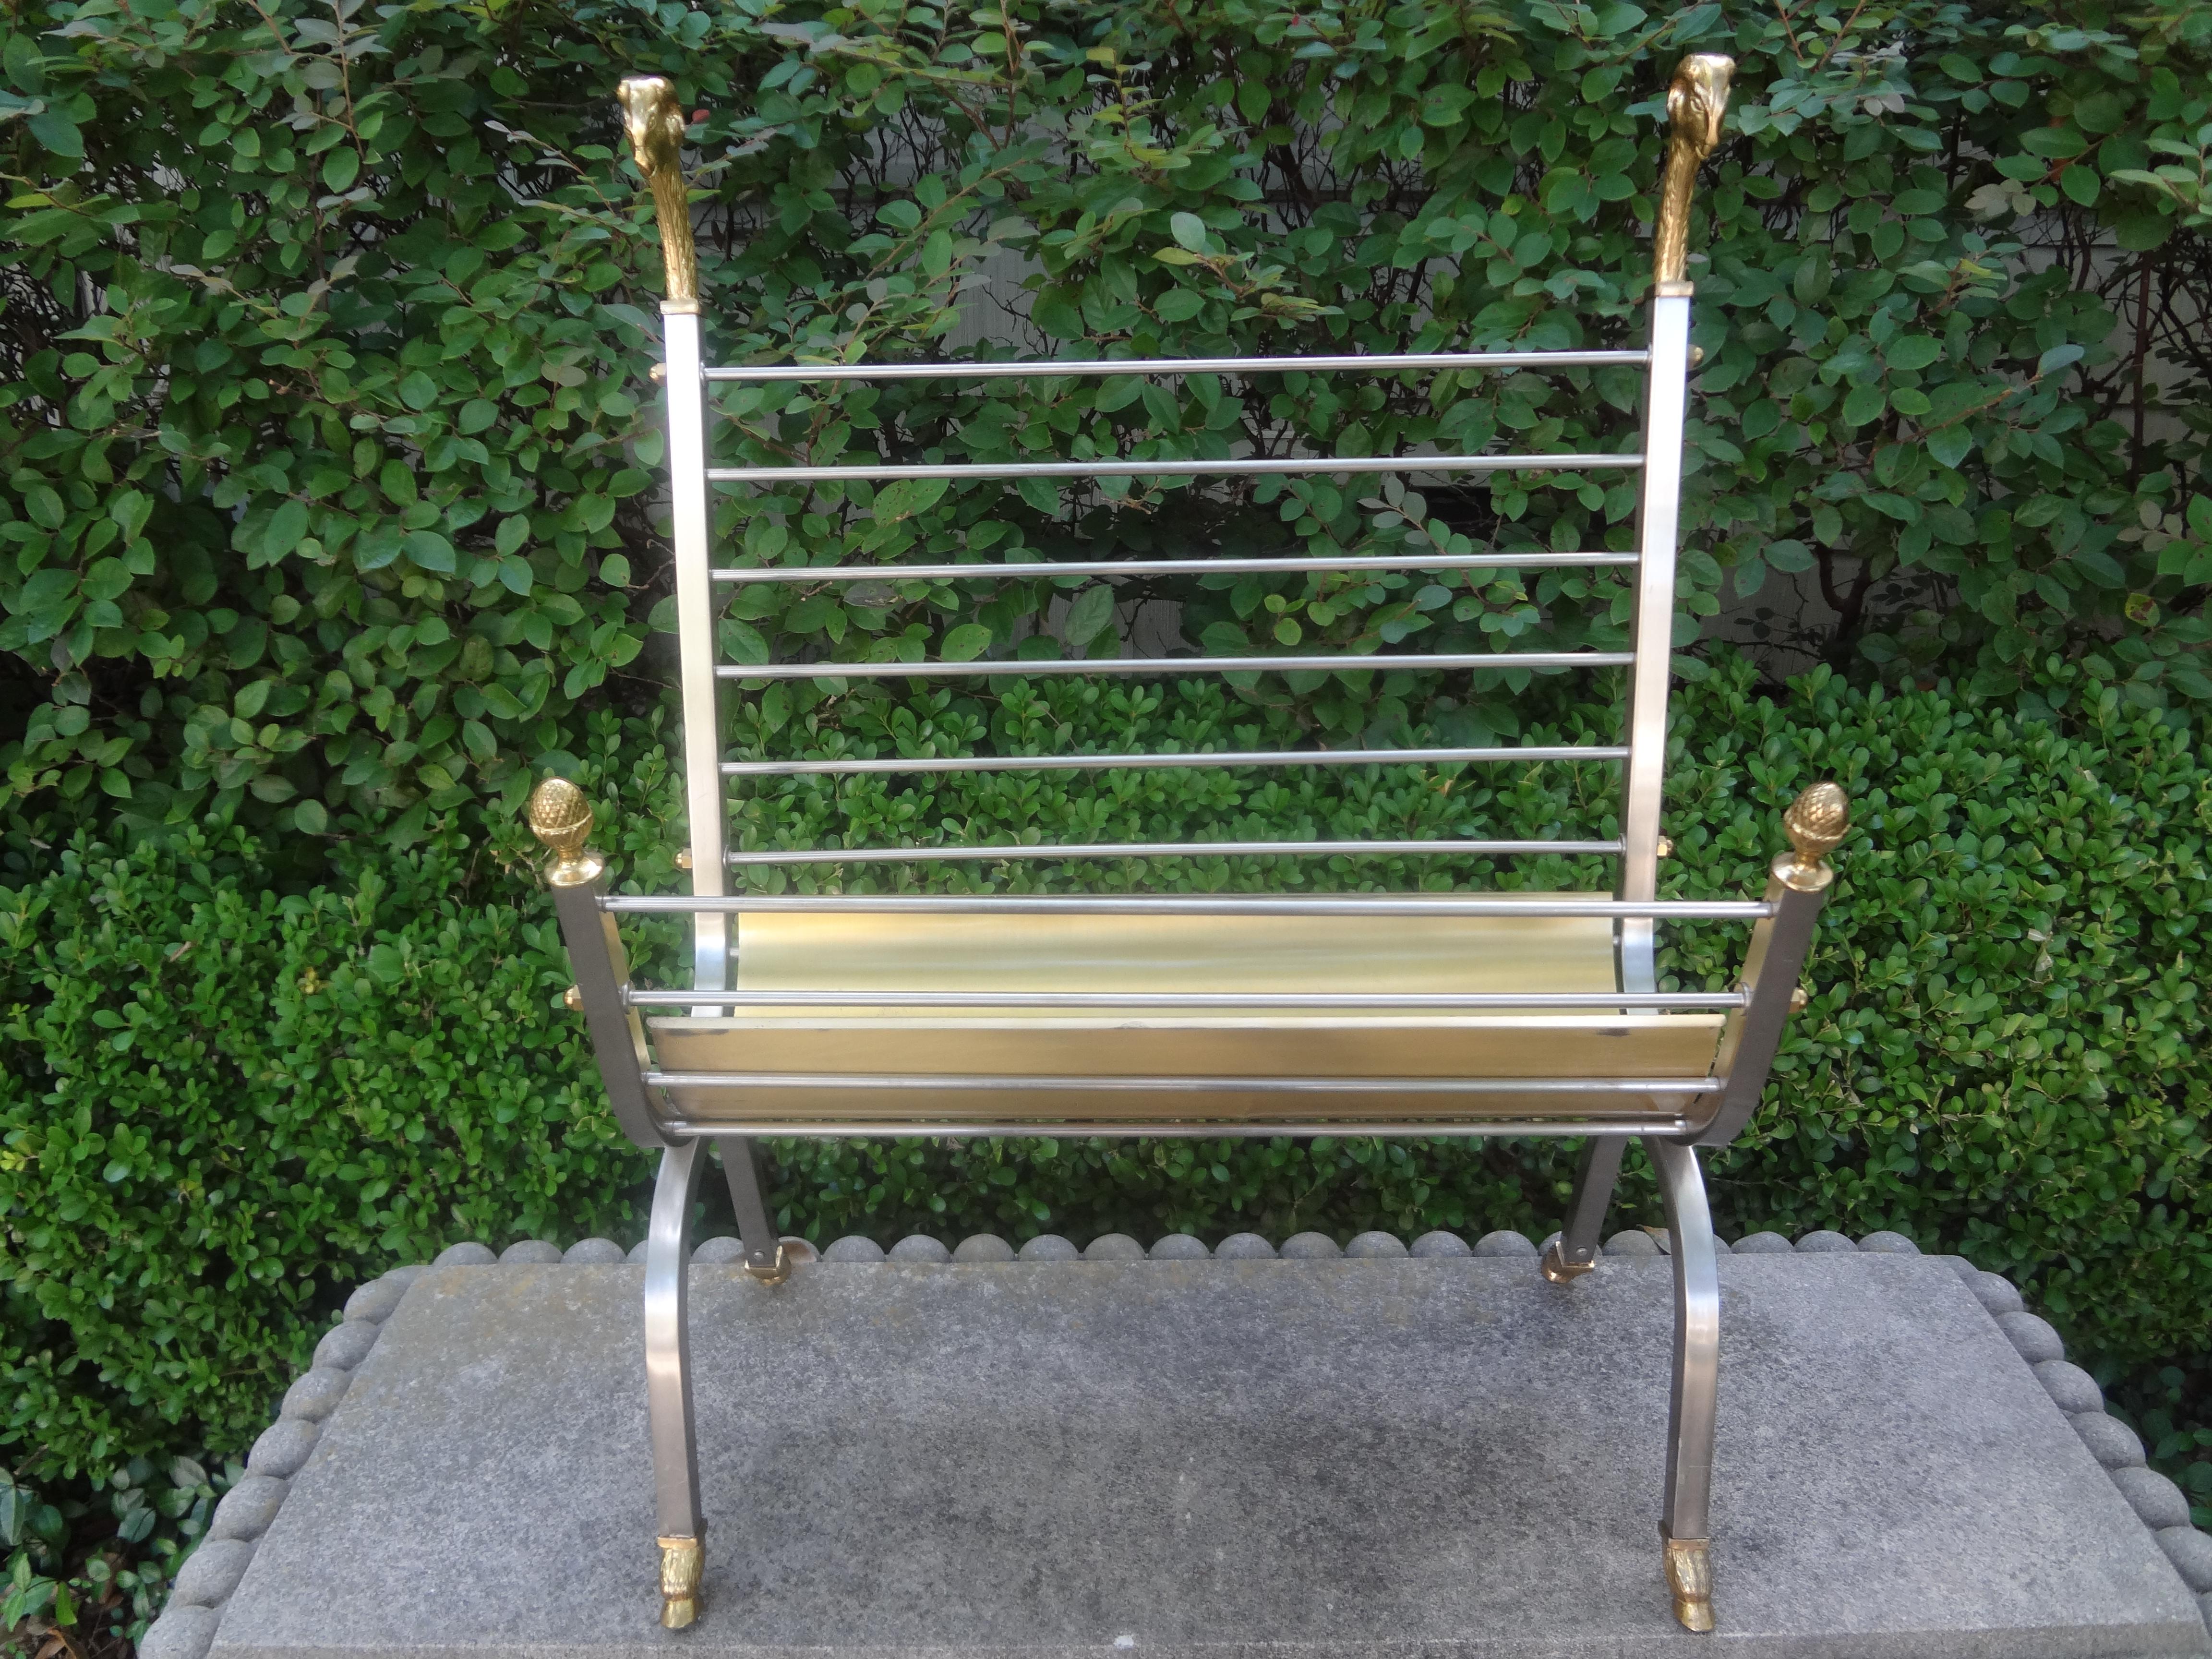 Italian Steel and Brass Magazine Rack, Maison Jansen Style.
Hollywood Regency steel and brass magazine rack, magazine stand, or magazine holder with brass ram’s heads and paw feet after Maison Jansen.
This midcentury Italian magazine rack would